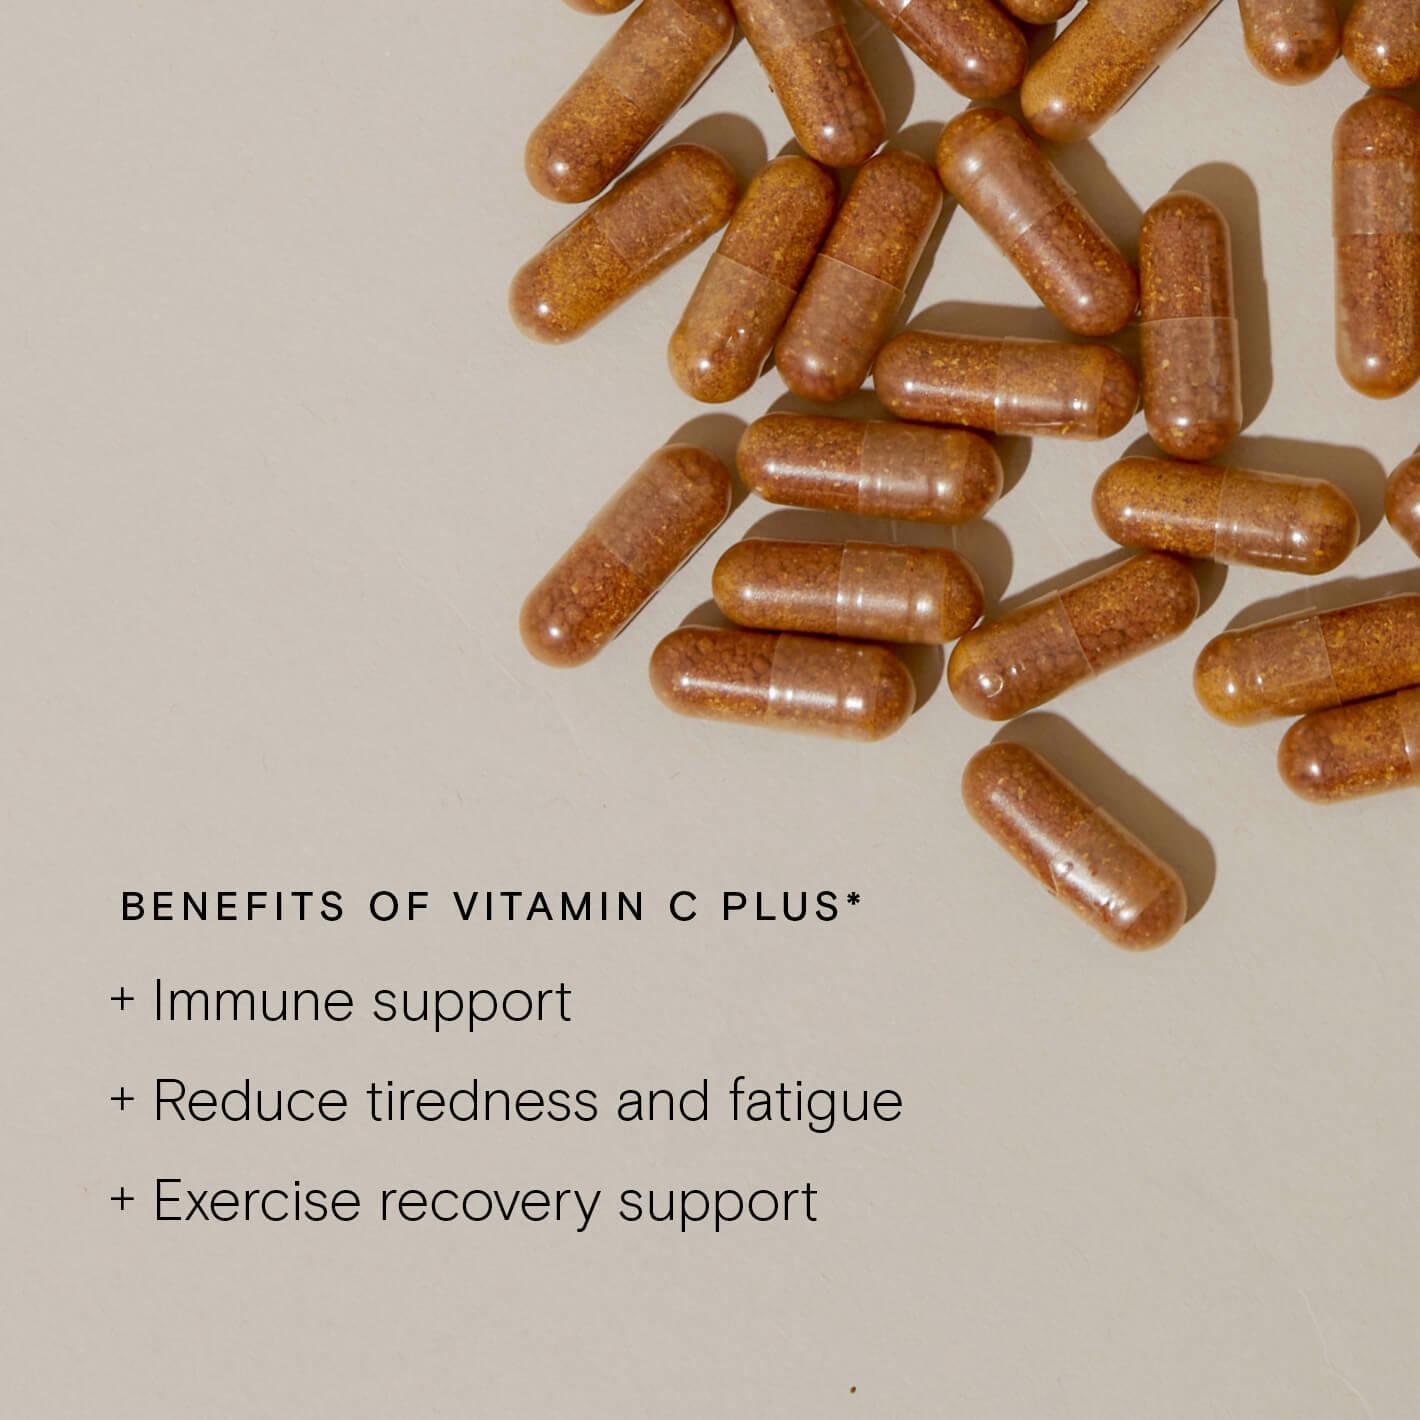 A list of the benefits of Vitamin C Plus, including immune support, reducing tiredness and fatigue, and exercise recovery support.